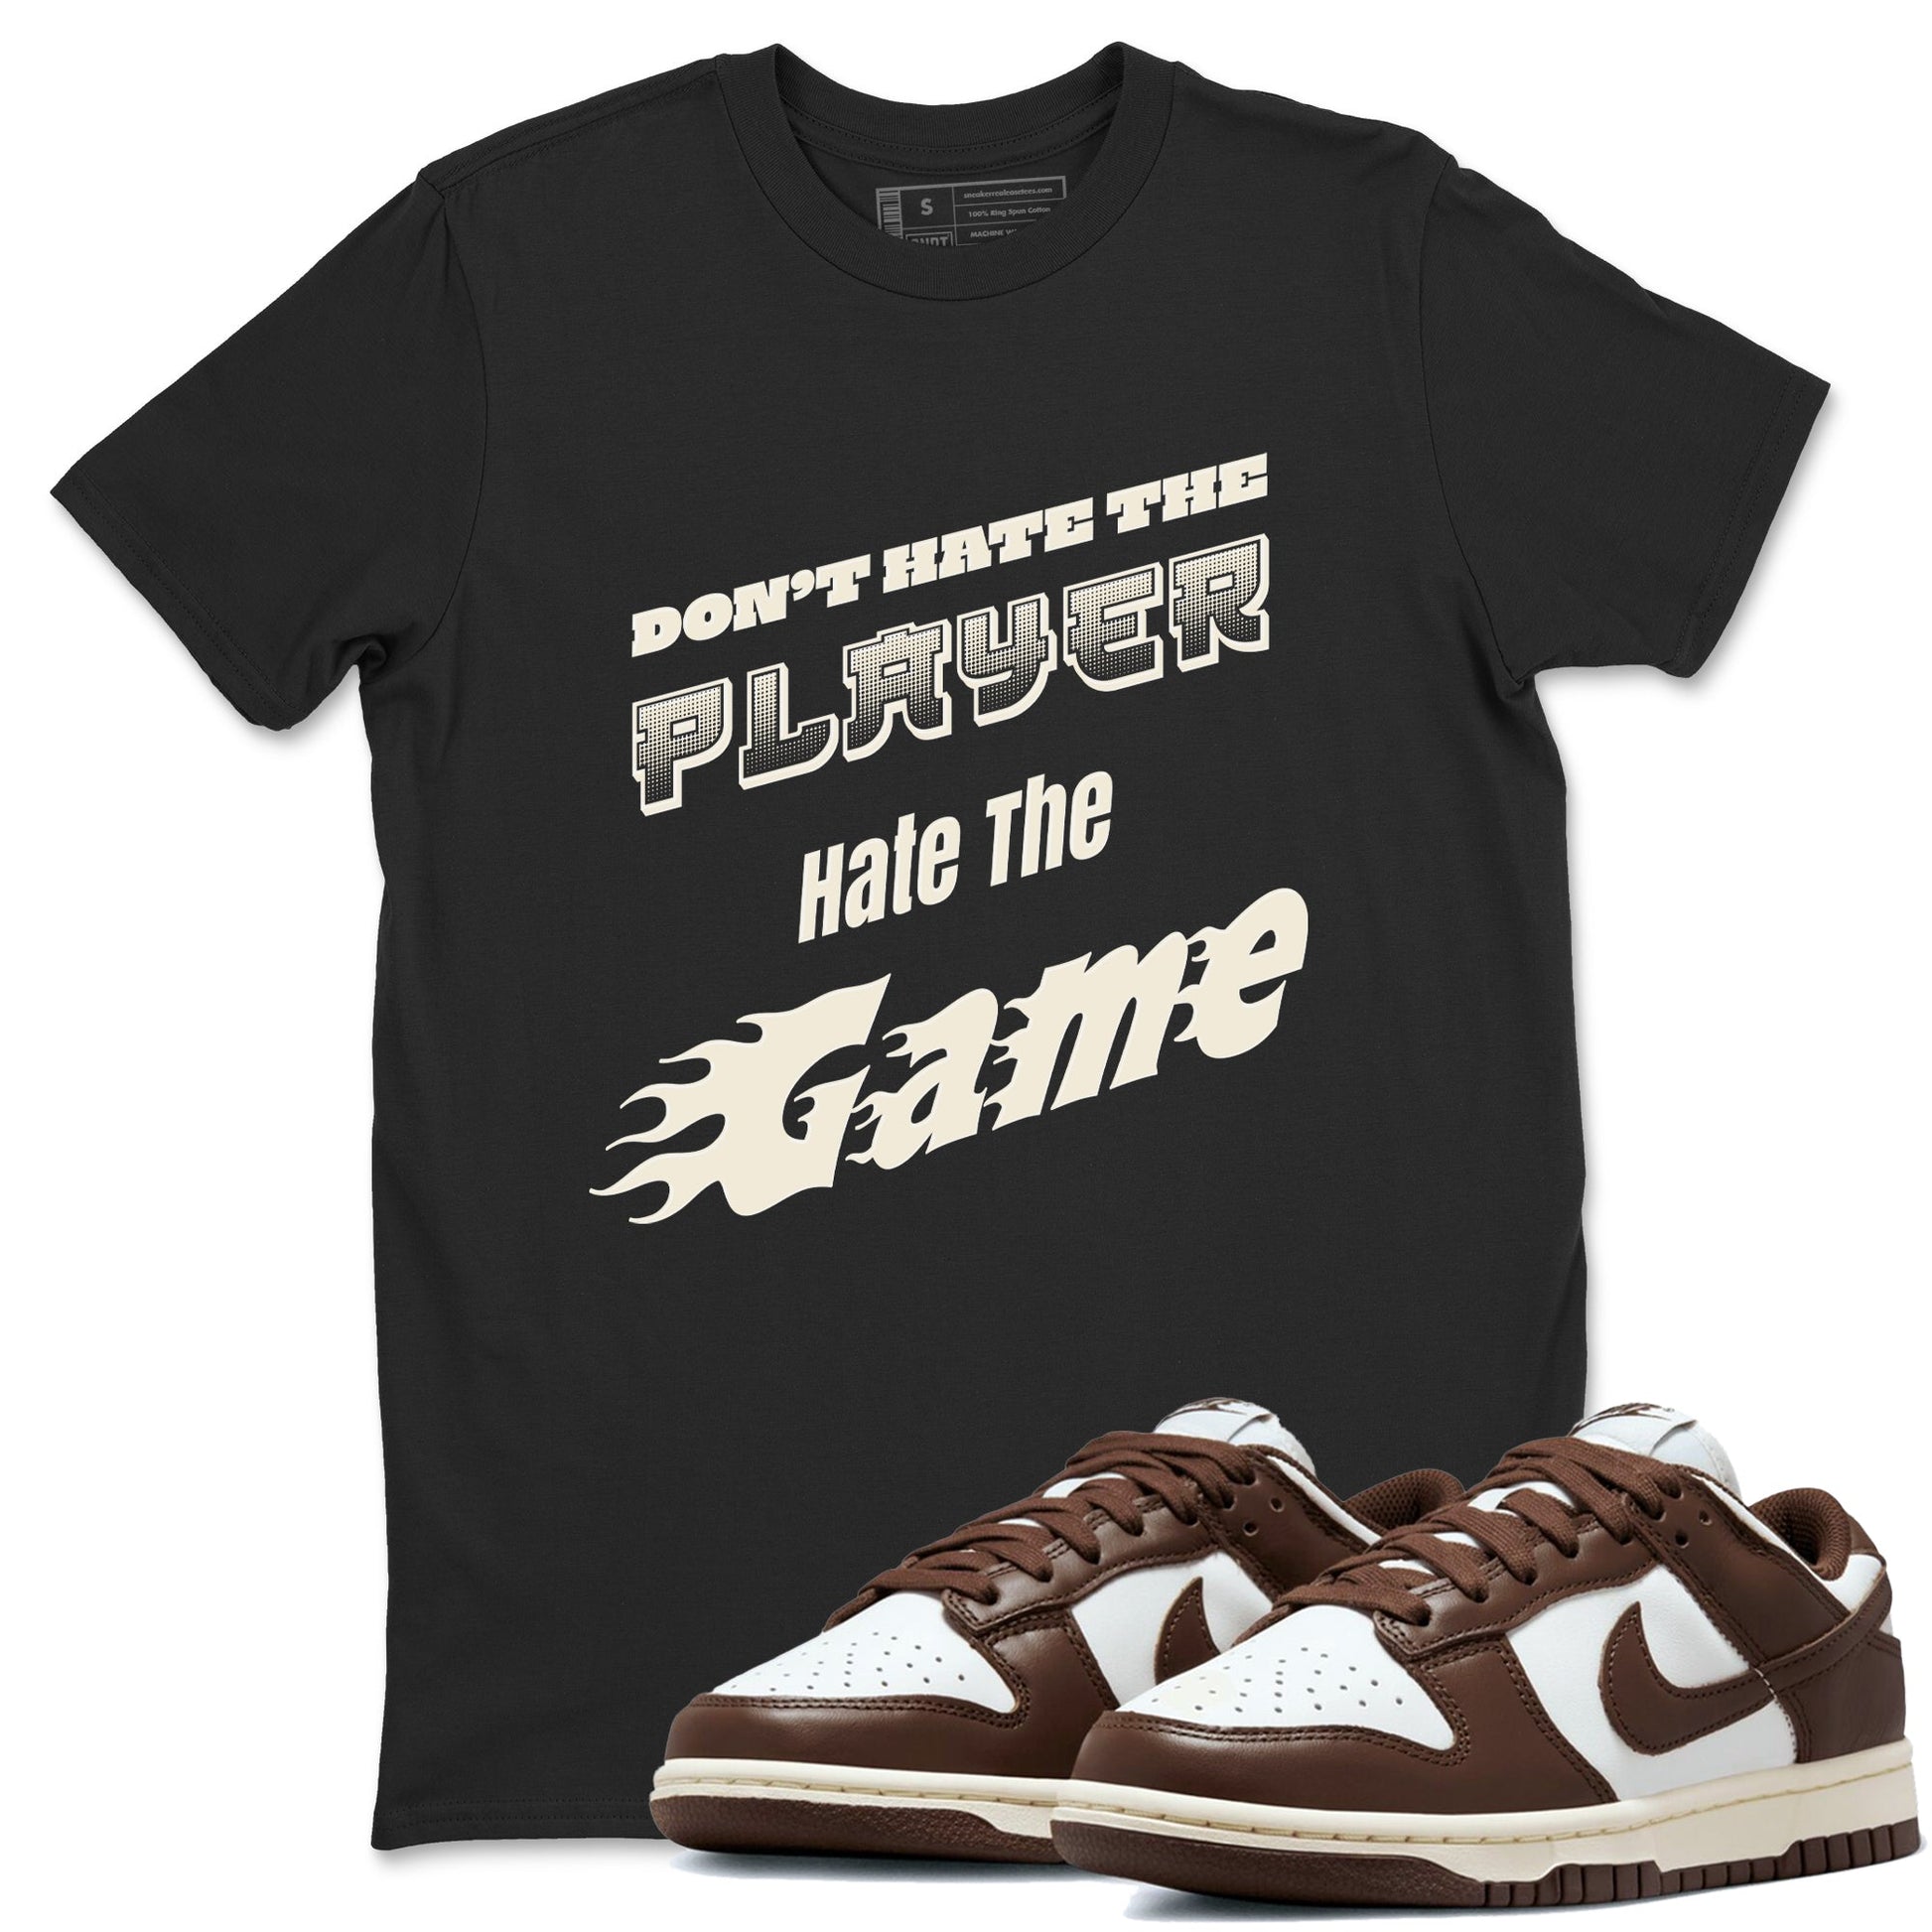 Dunk Cacao Wow shirt to match jordans Don't Hate The Player sneaker tees Dunk Cacao Wow SNRT Sneaker Release Tees Unisex Black 1 T-Shirt